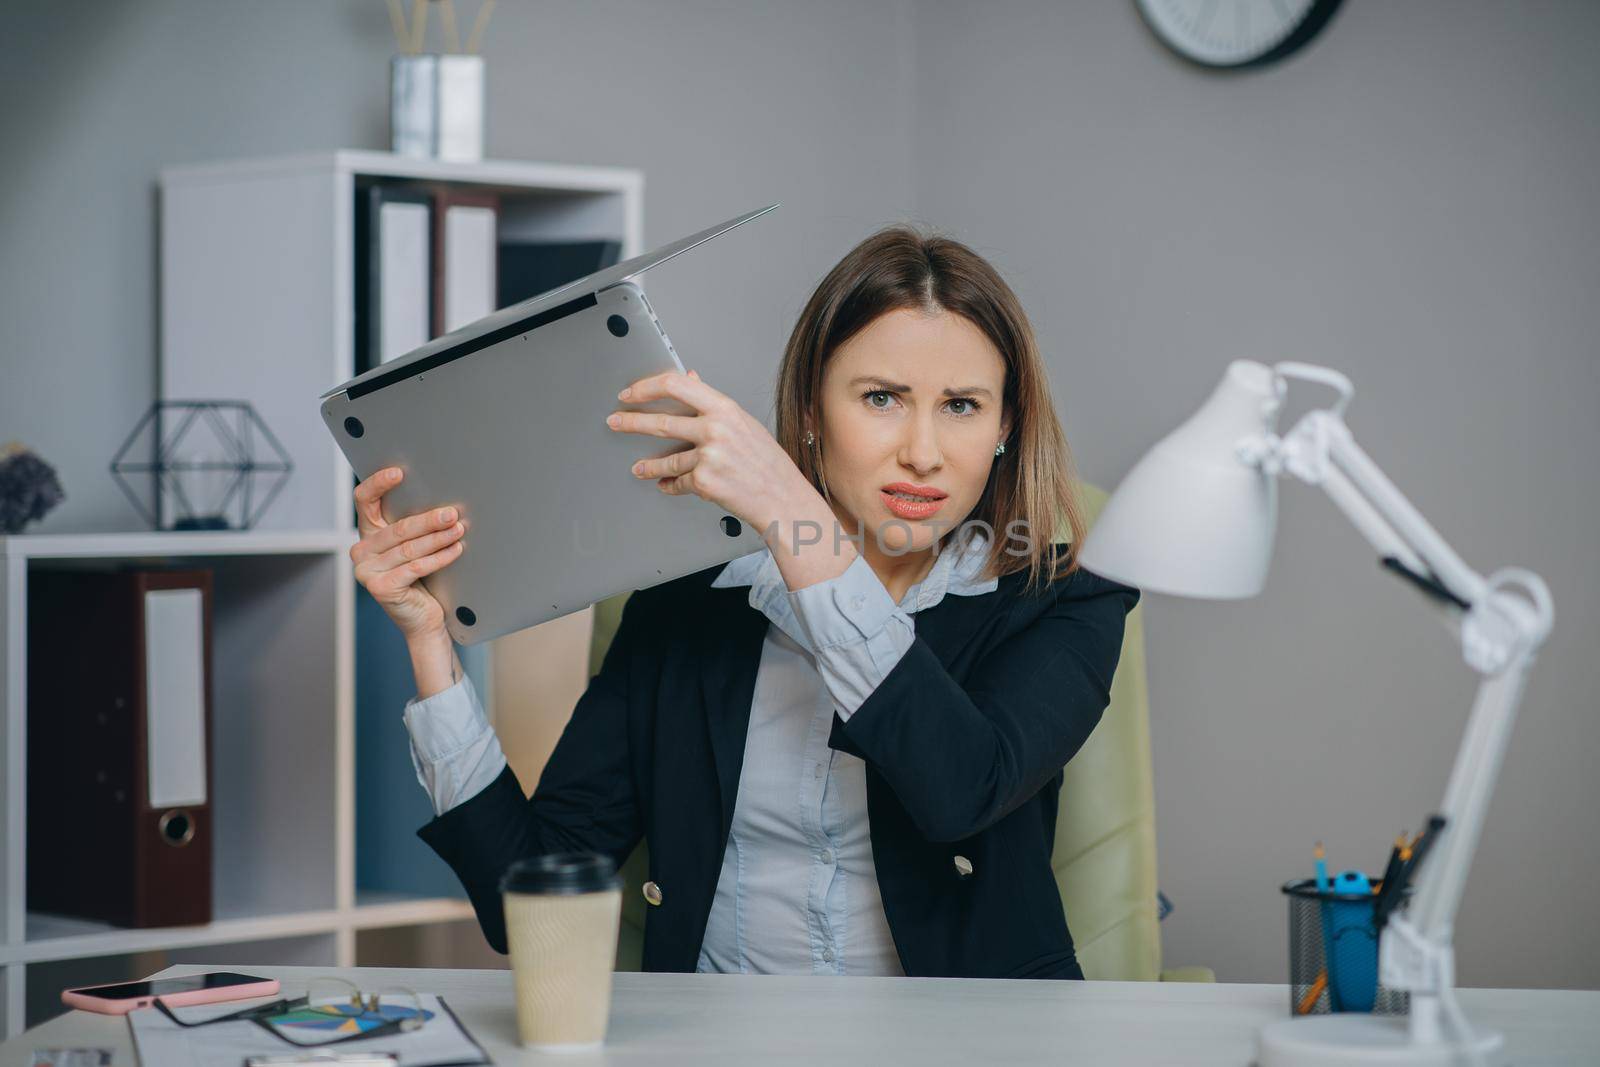 Stressed businesswoman annoyed using stuck laptop, angry woman mad about computer problem frustrated with data loss, online mistake, software error or system failure. by uflypro